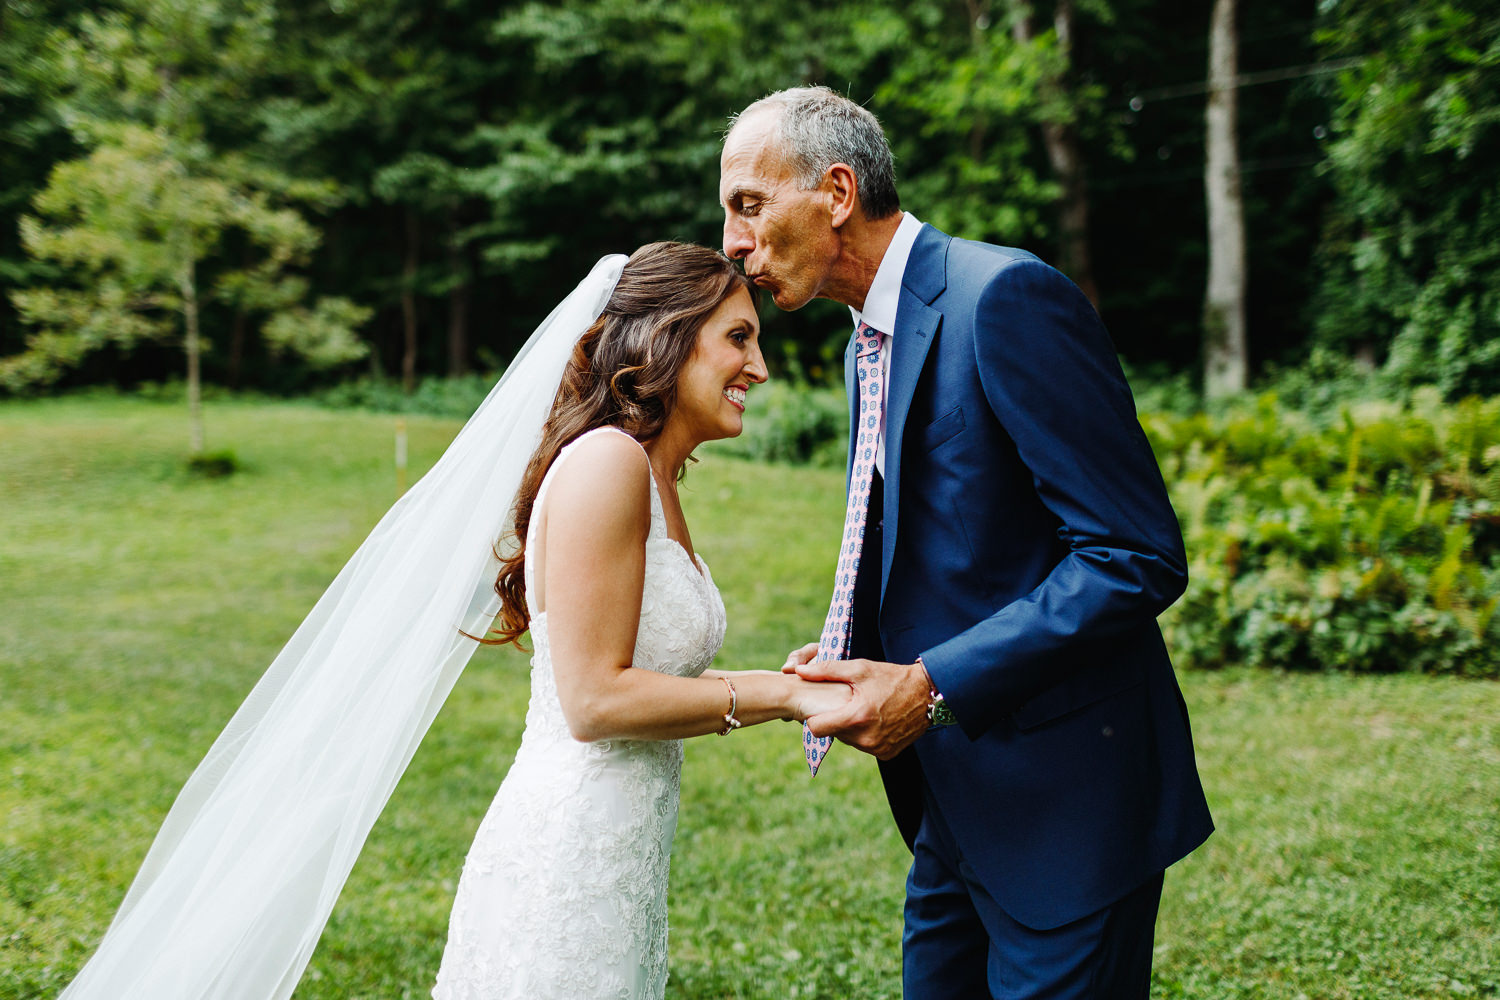 father of the bride kissing her forehead at Arlington, Vermont wedding